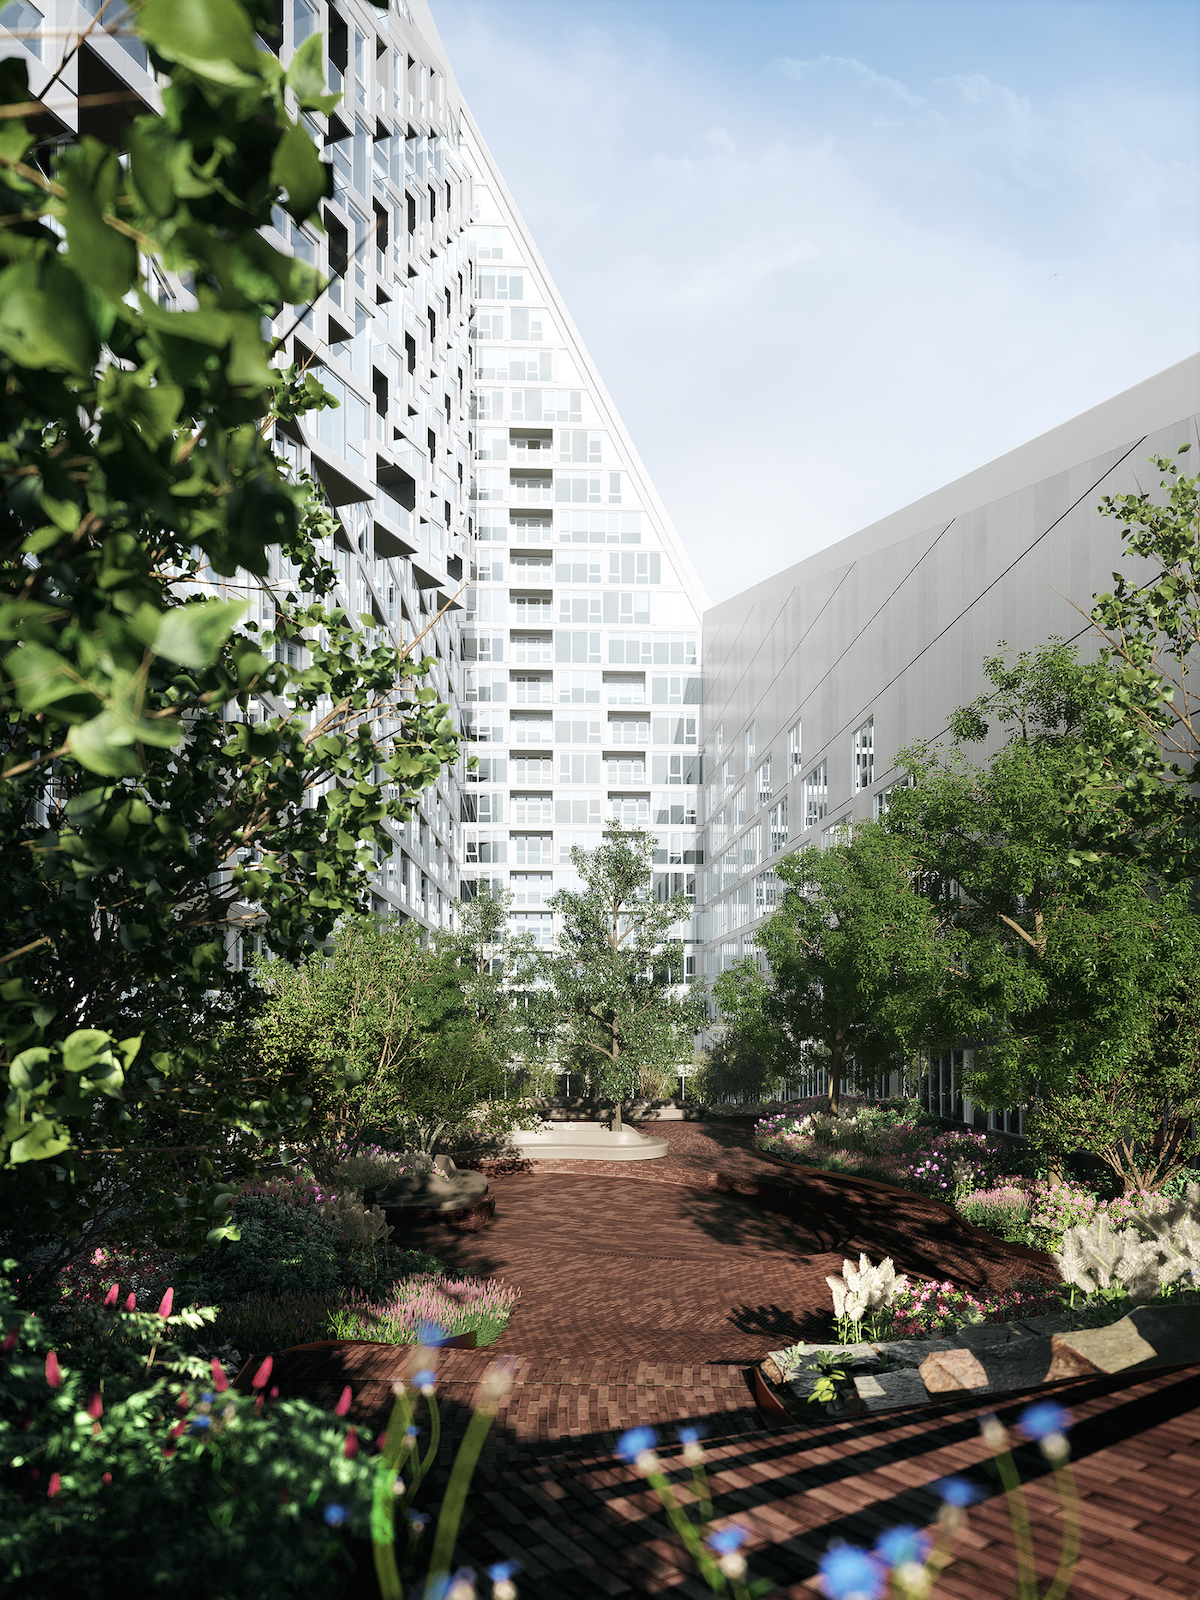 The courtyard of 625 West 57th Street, rendering courtesy of Durst Organization